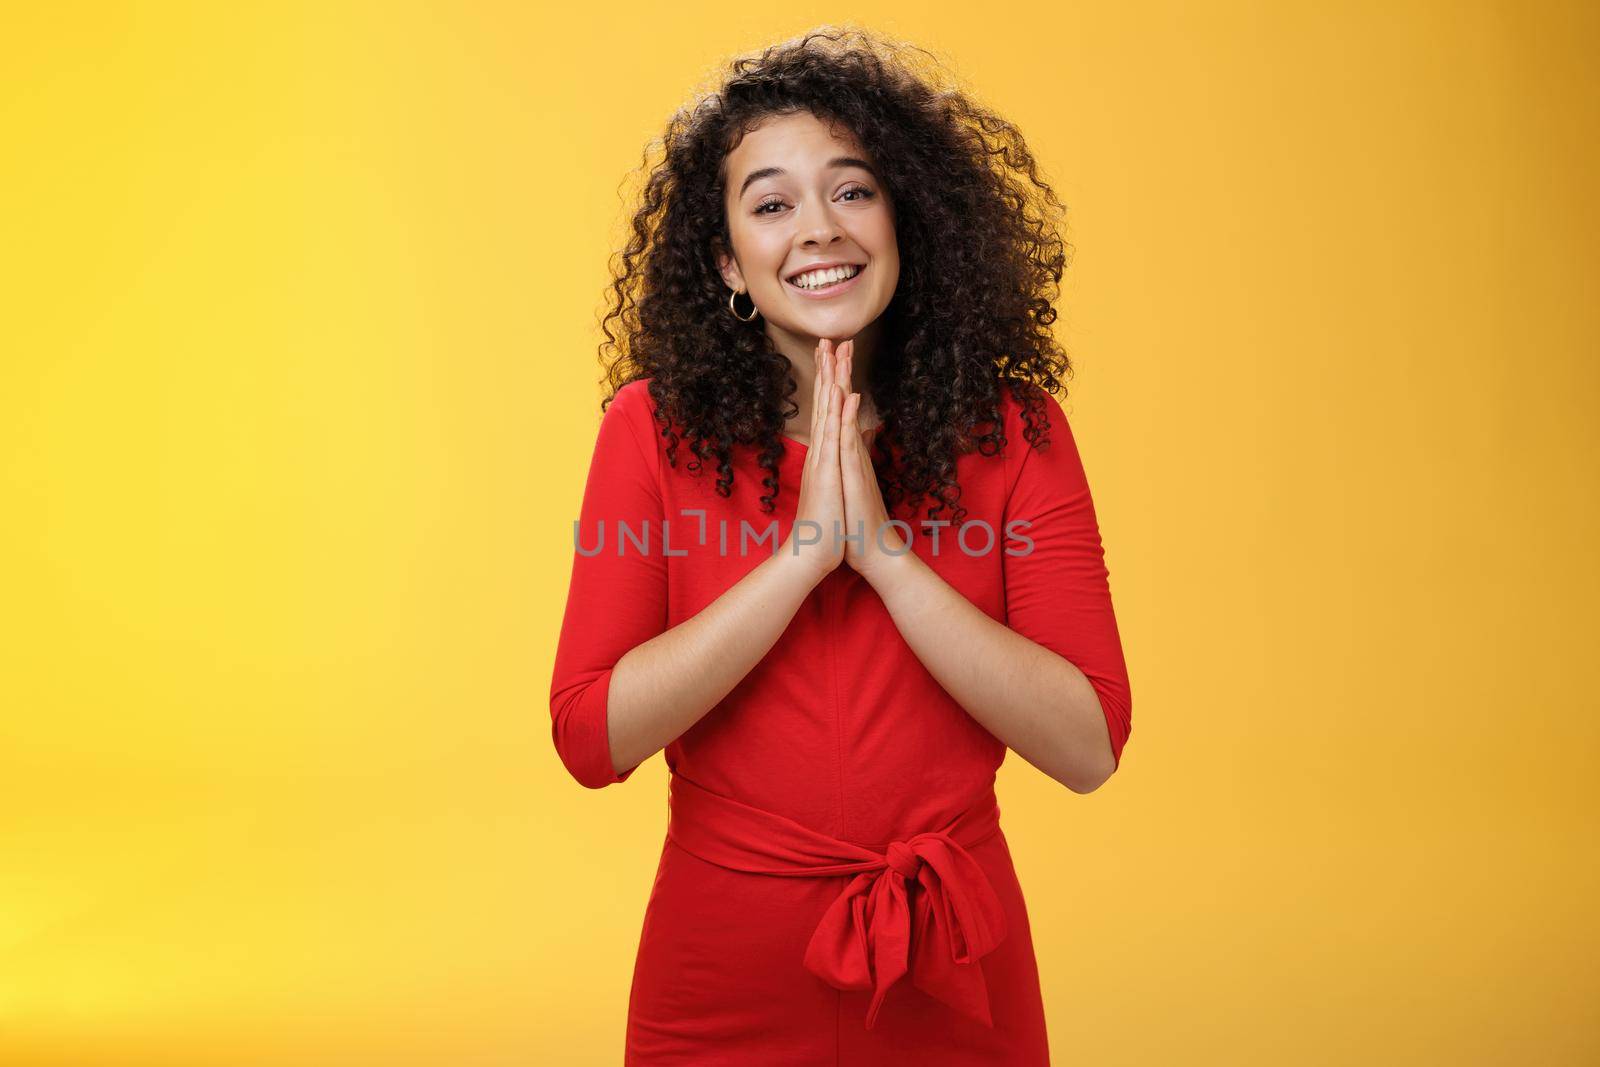 Girl with angel smile making eyes as wanting friend make favour, holding hands in pray, grinning and gazing with anticipation as begging for help standing silly and cute against yellow background by Benzoix